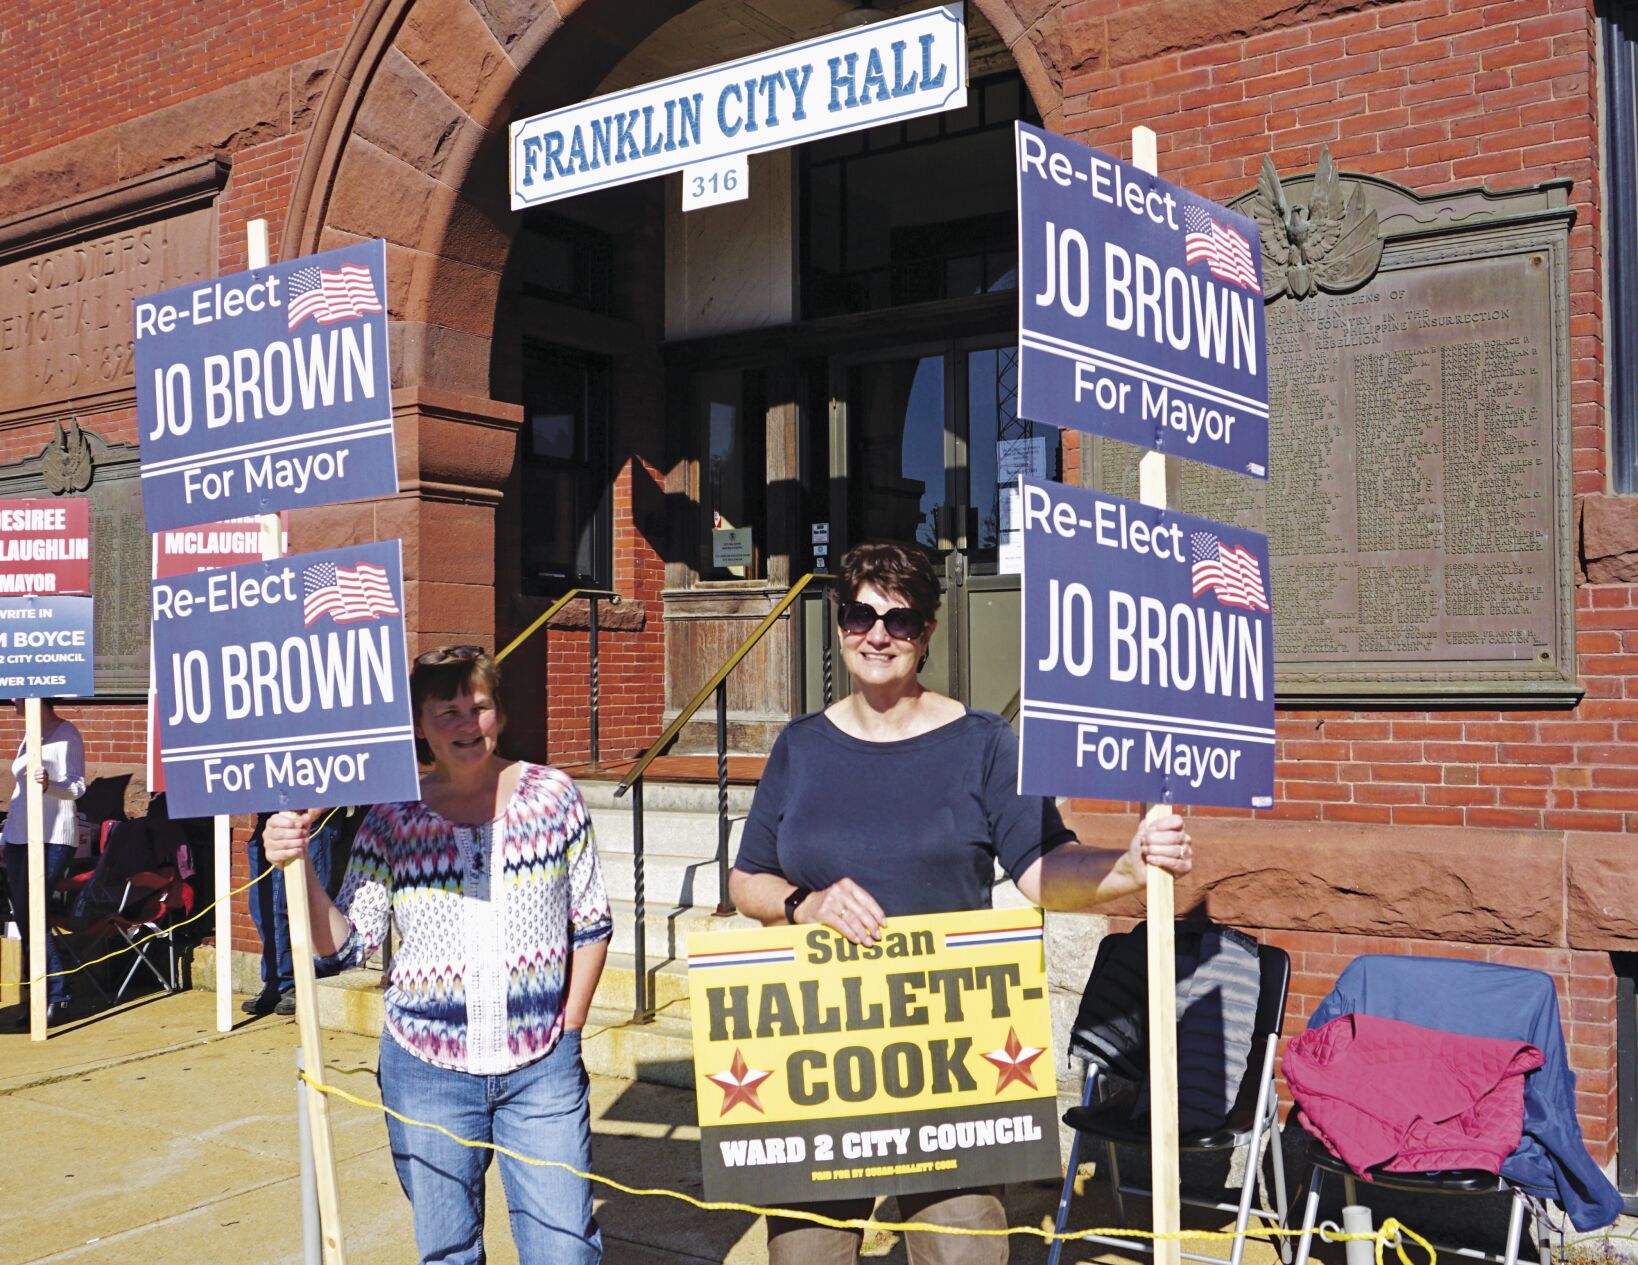 With minds largely made up, Franklin voters hit the polls | Local